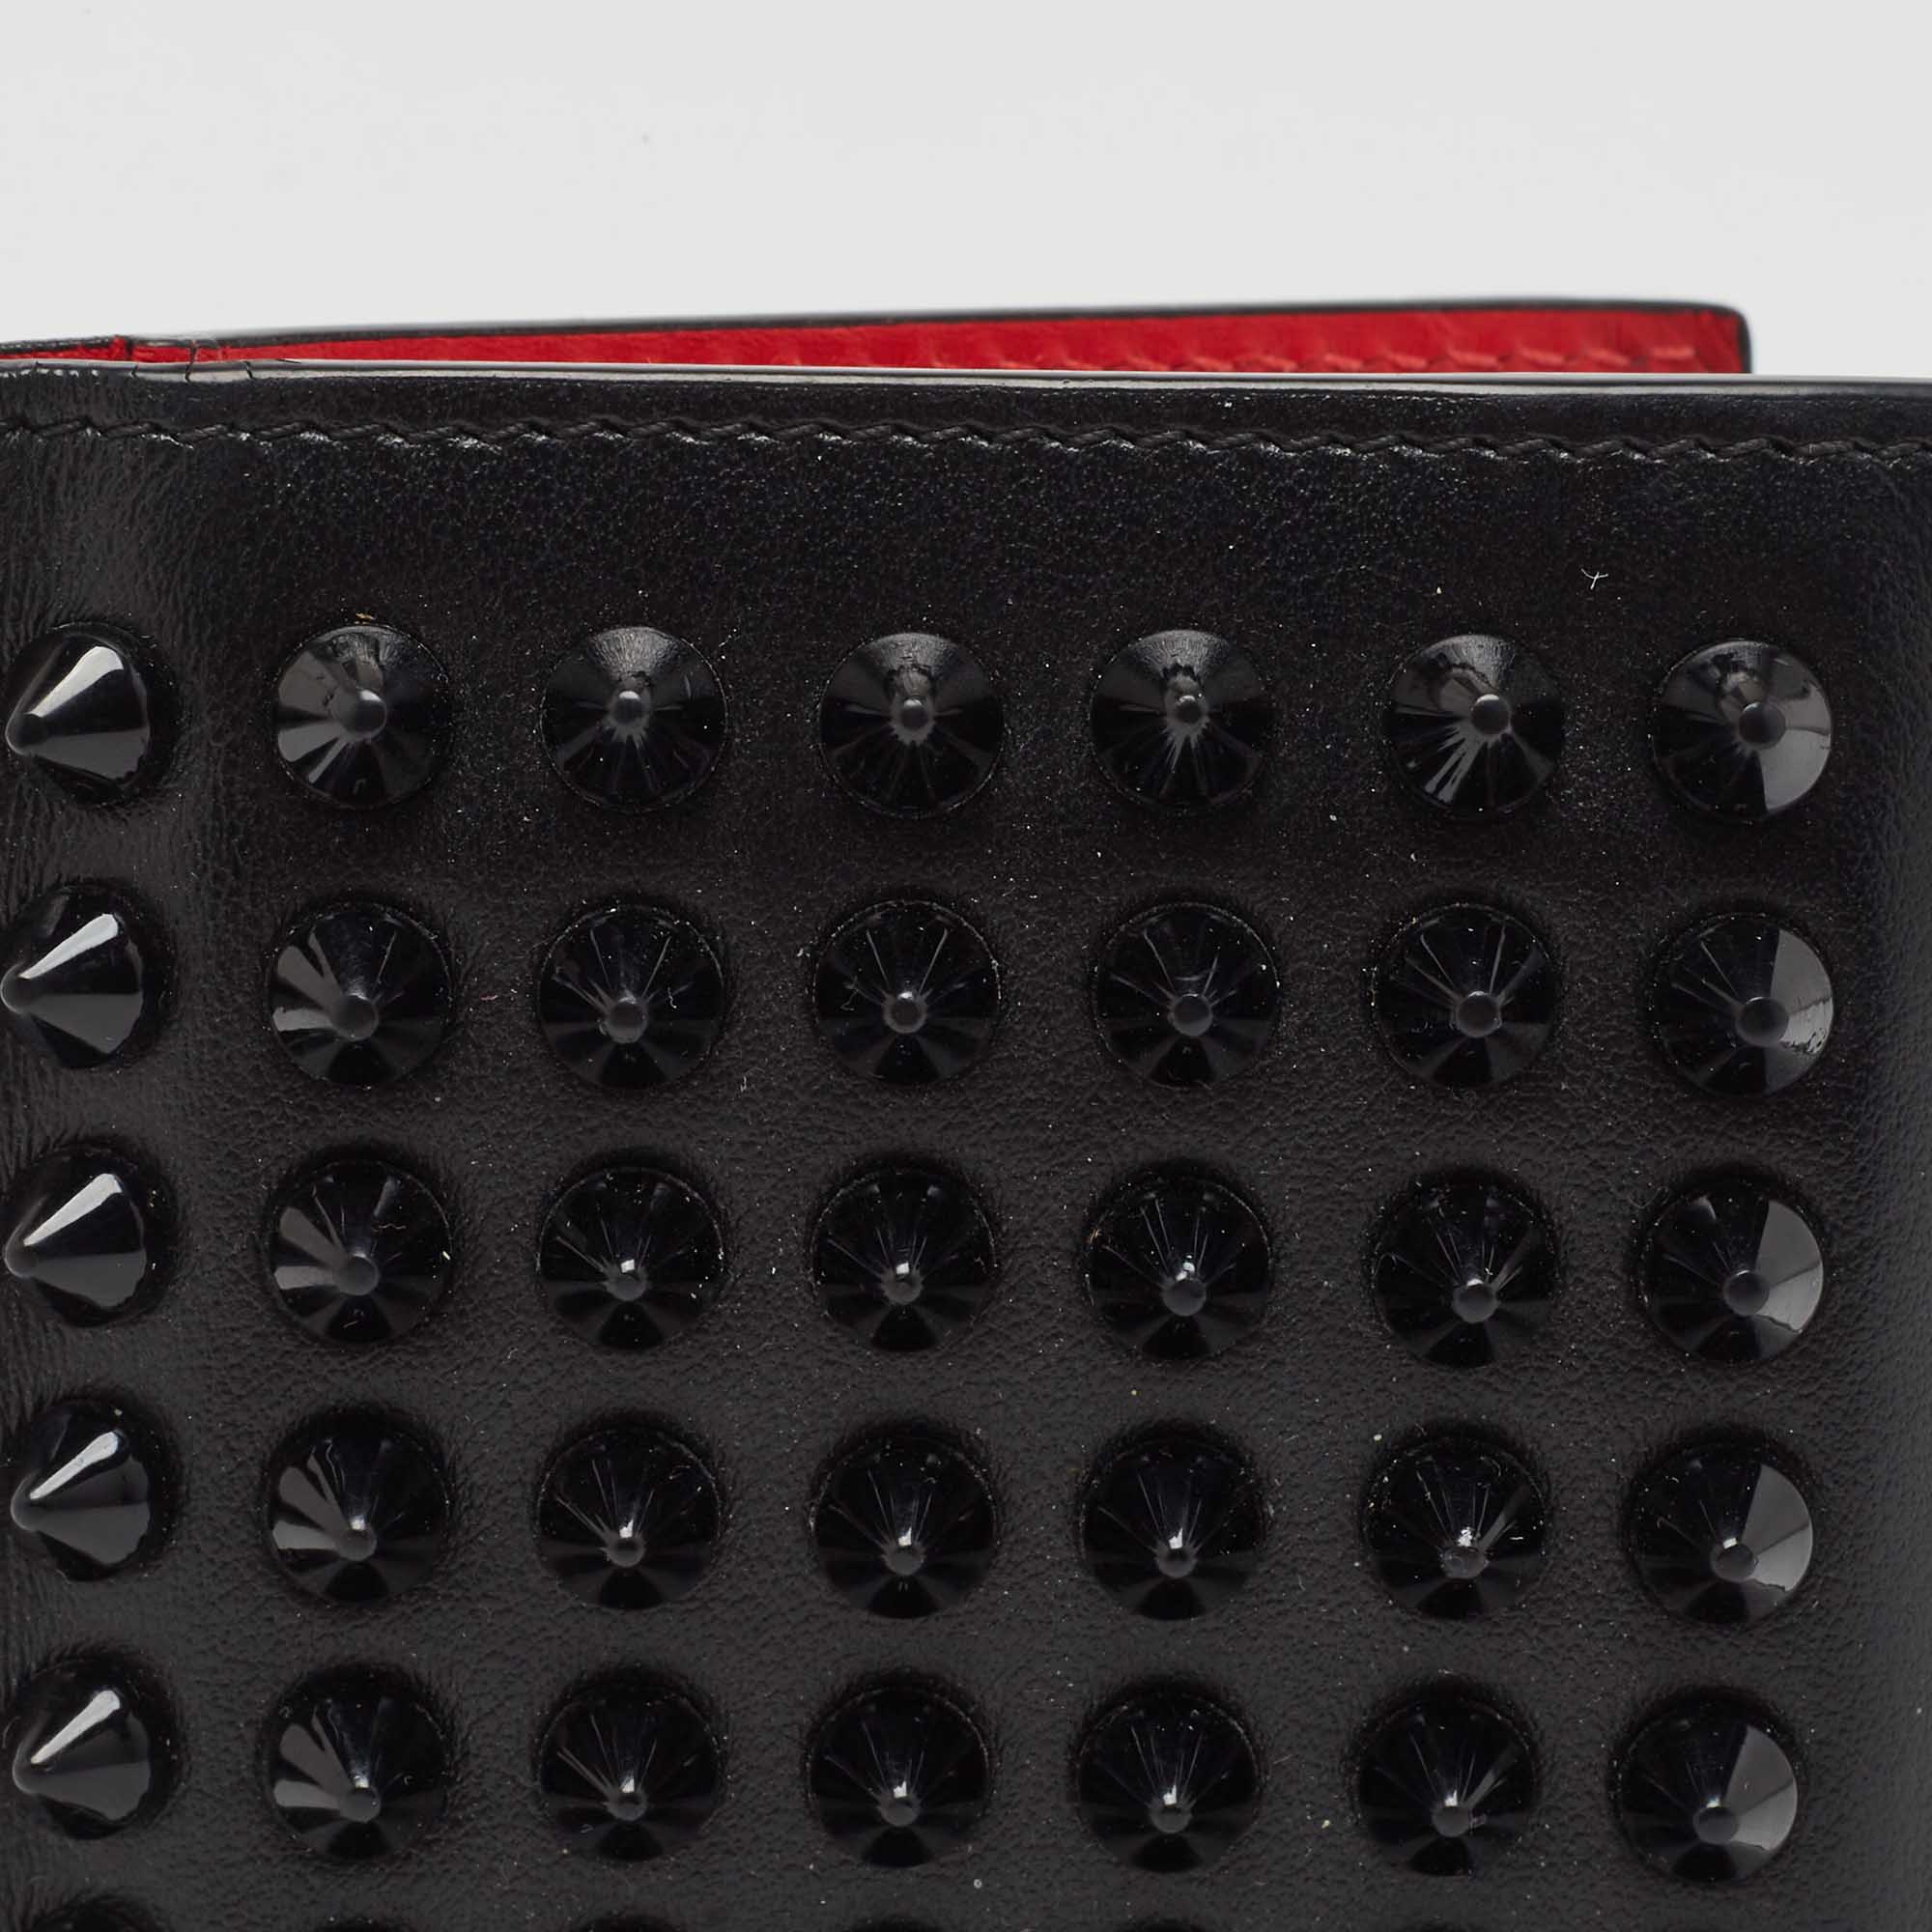 Christian Louboutin Black Leather Clipsos Studded Bifold Card Case